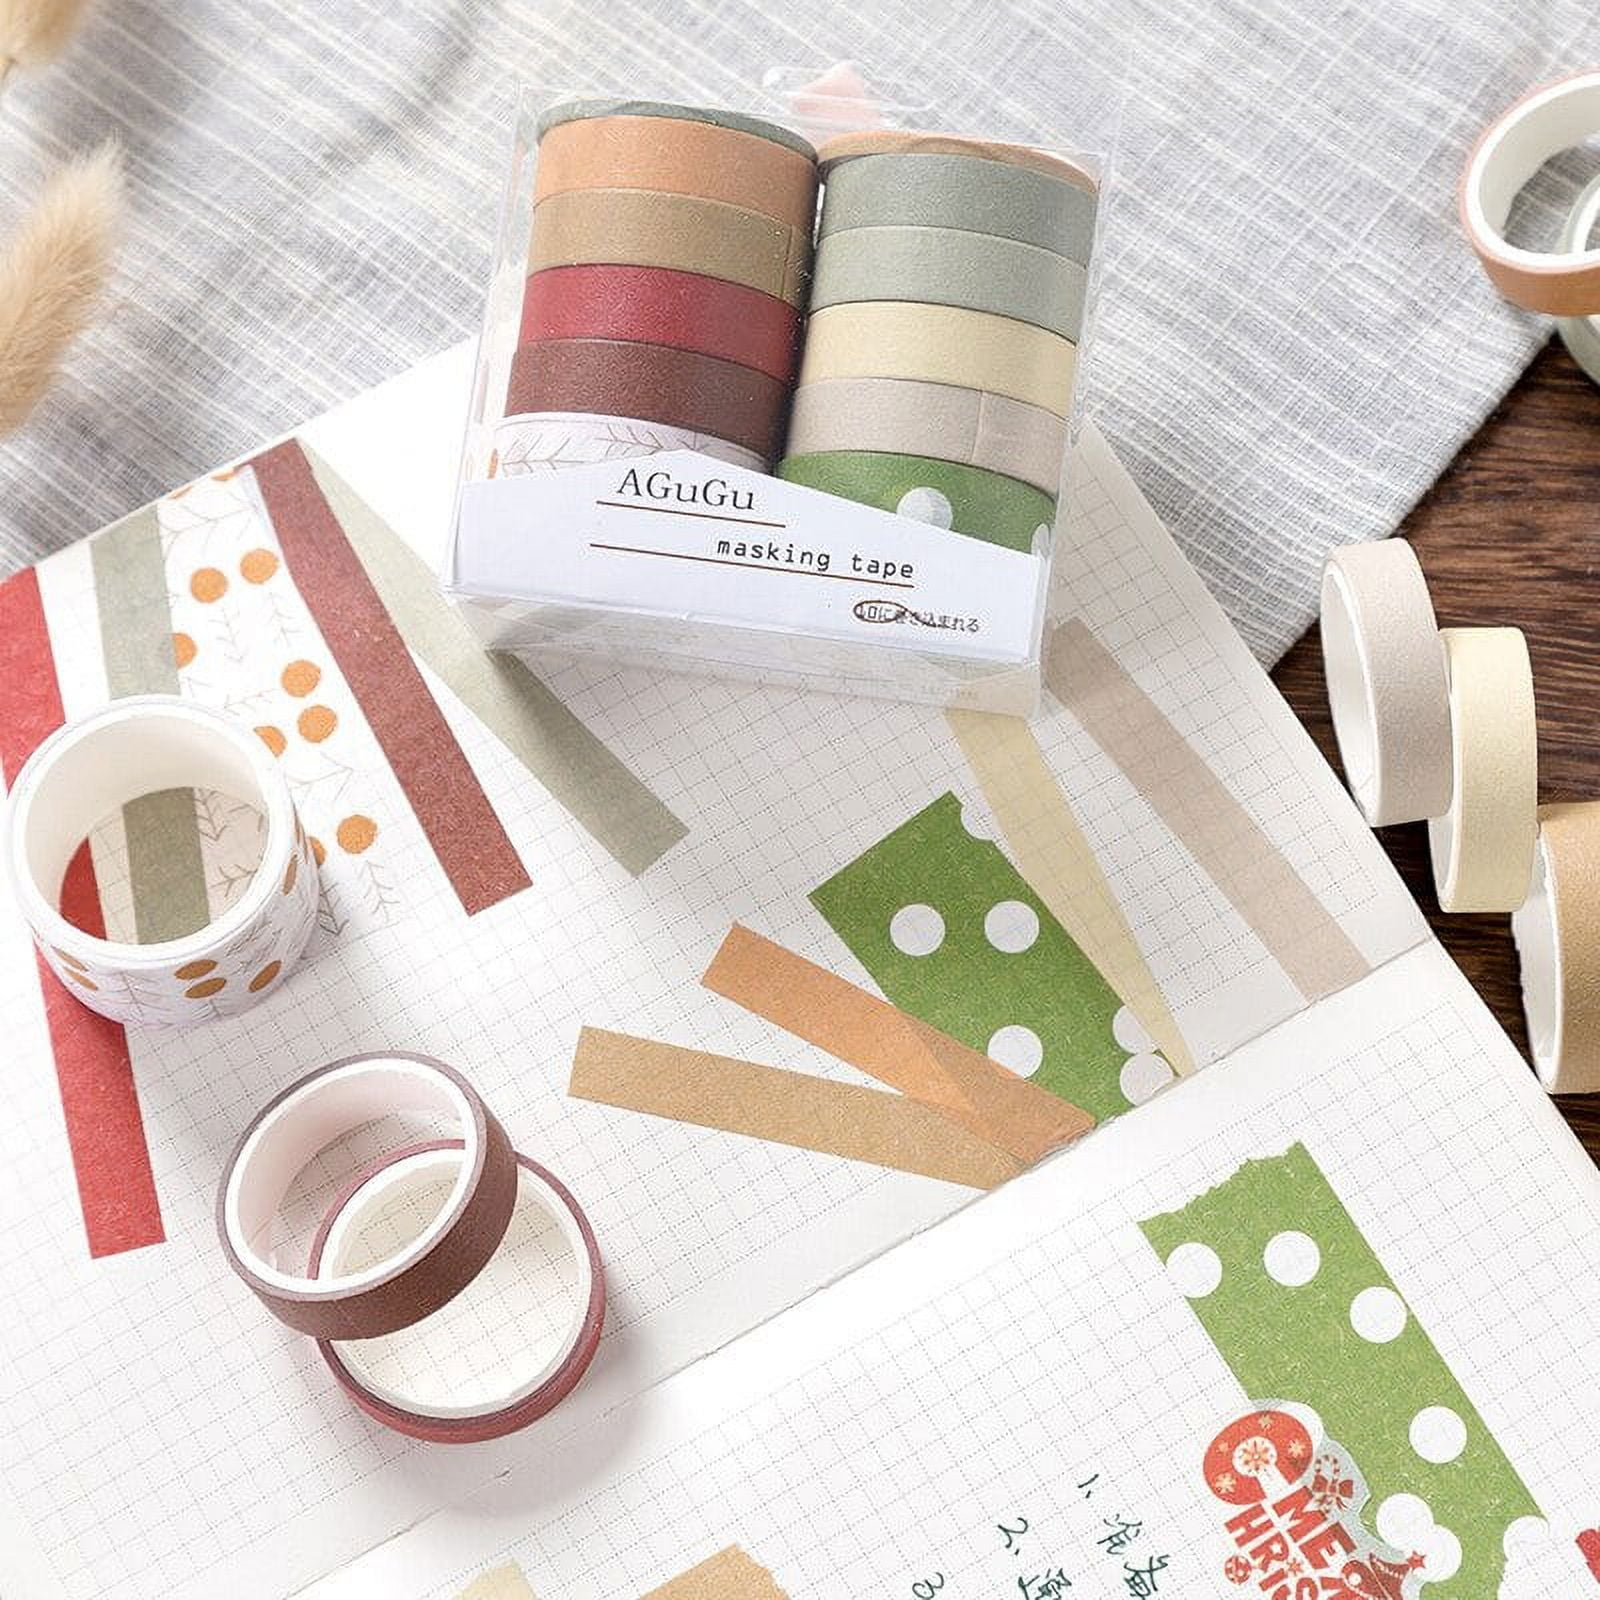 Mr-Label Day of The Week Washi Tape – Masking Tape for DIY Weekly Planner  Time Plan Gift Wrapping (2 Rolls) – MR-LABEL